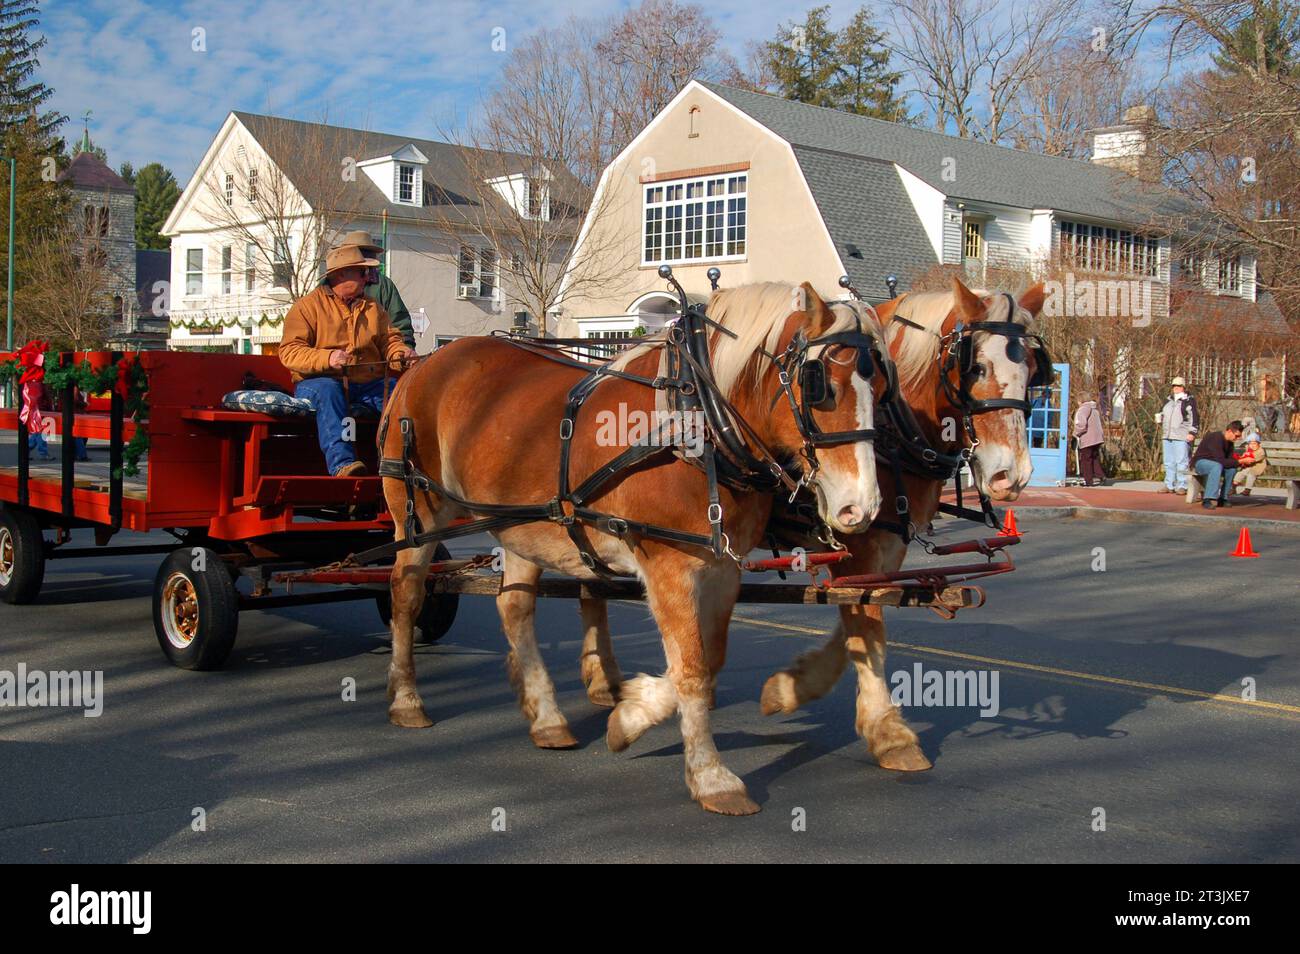 Guests enjoy a ride through the historic town of Stockbridge Massachusetts, famous for a Norman Rockwell painting, during a Christmas festival Stock Photo